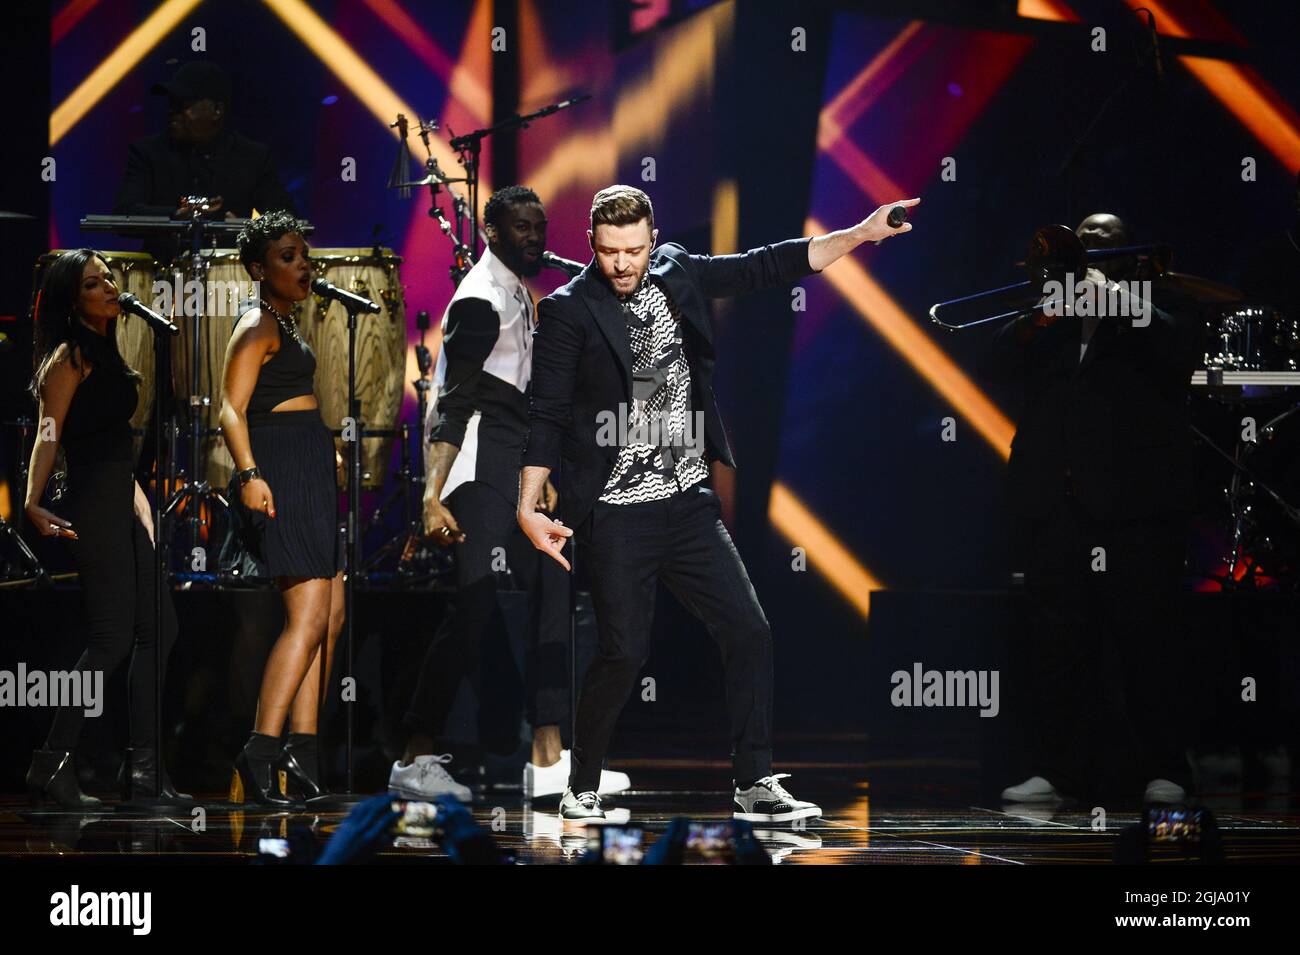 US artist Justin Timberlake performs after the second dress rehearsal for the Eurovision Song Contest final in Stockholm, Sweden, Friday, May 13, 2016 Photo: Maja Suslin / TT / Kod 10300 ** SWEDEN OUT **  Stock Photo